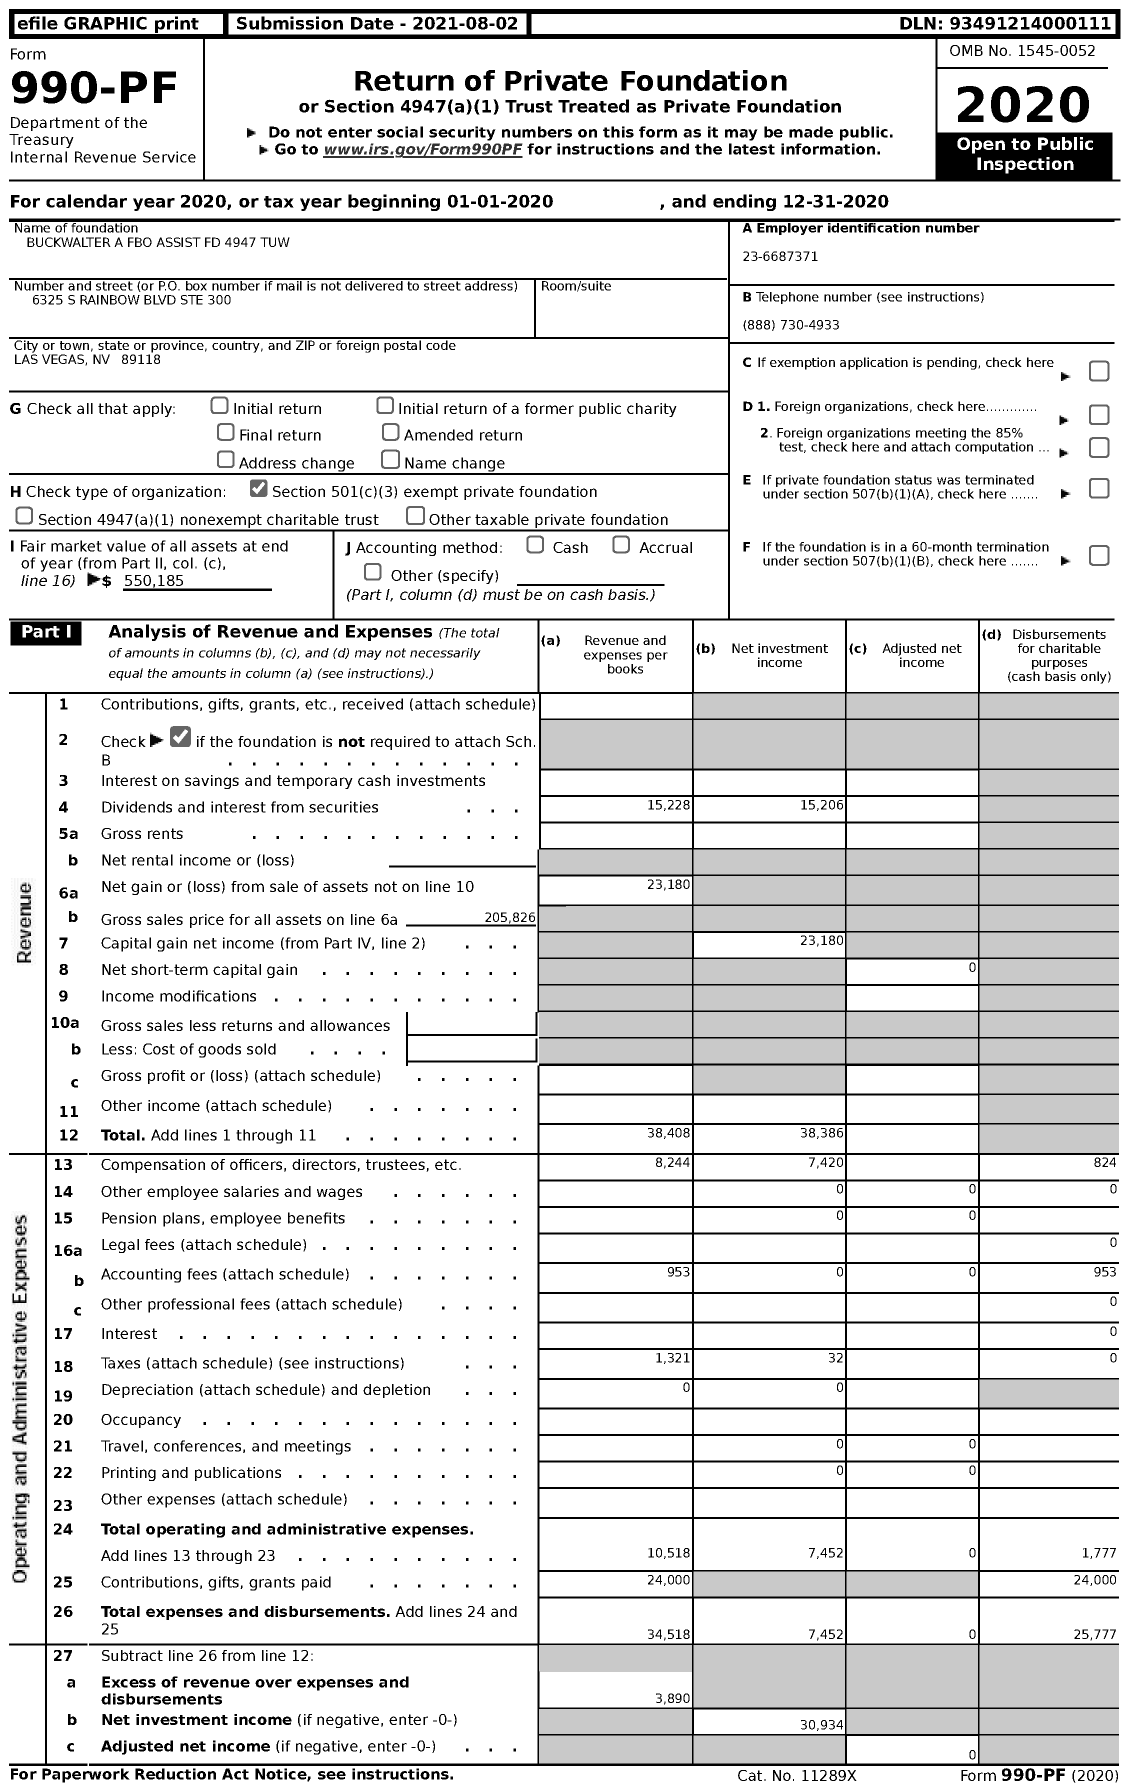 Image of first page of 2020 Form 990PF for Buckwalter A Fbo Assist FD 4947 4947-tuw